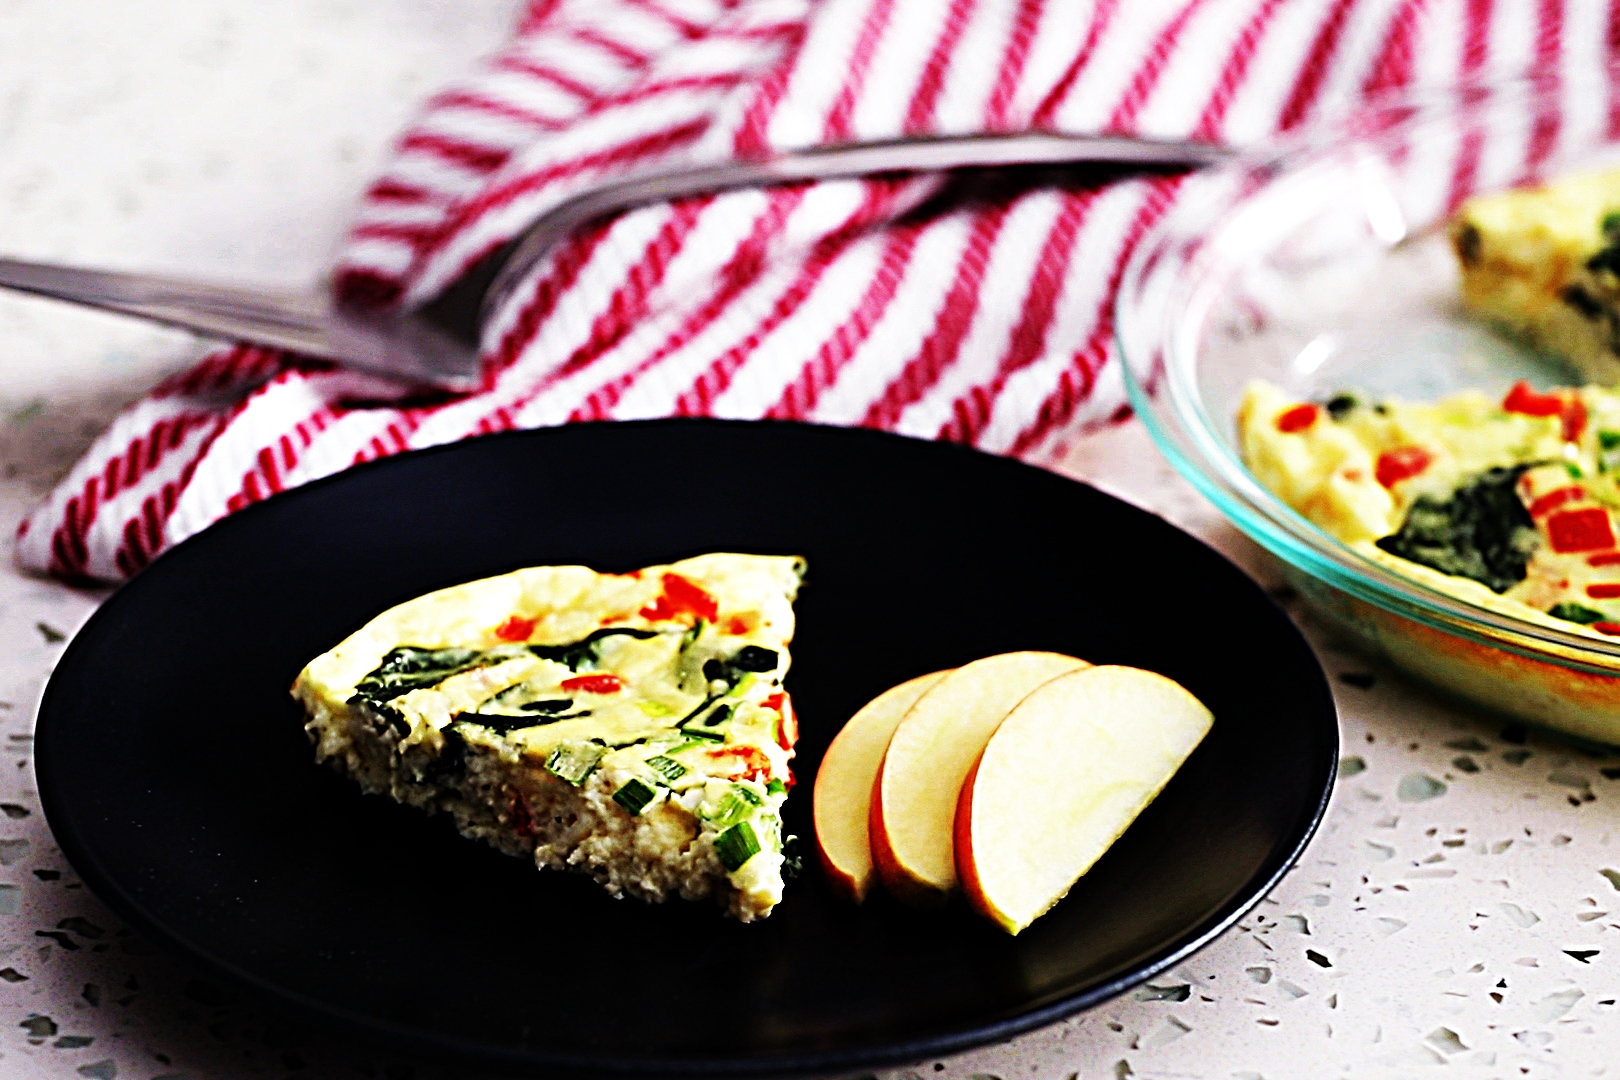 Stupid-Easy Recipe for Skinny Crustless Spinach, Red Pepper, and Feta Quiche (#1 Top-Rated)